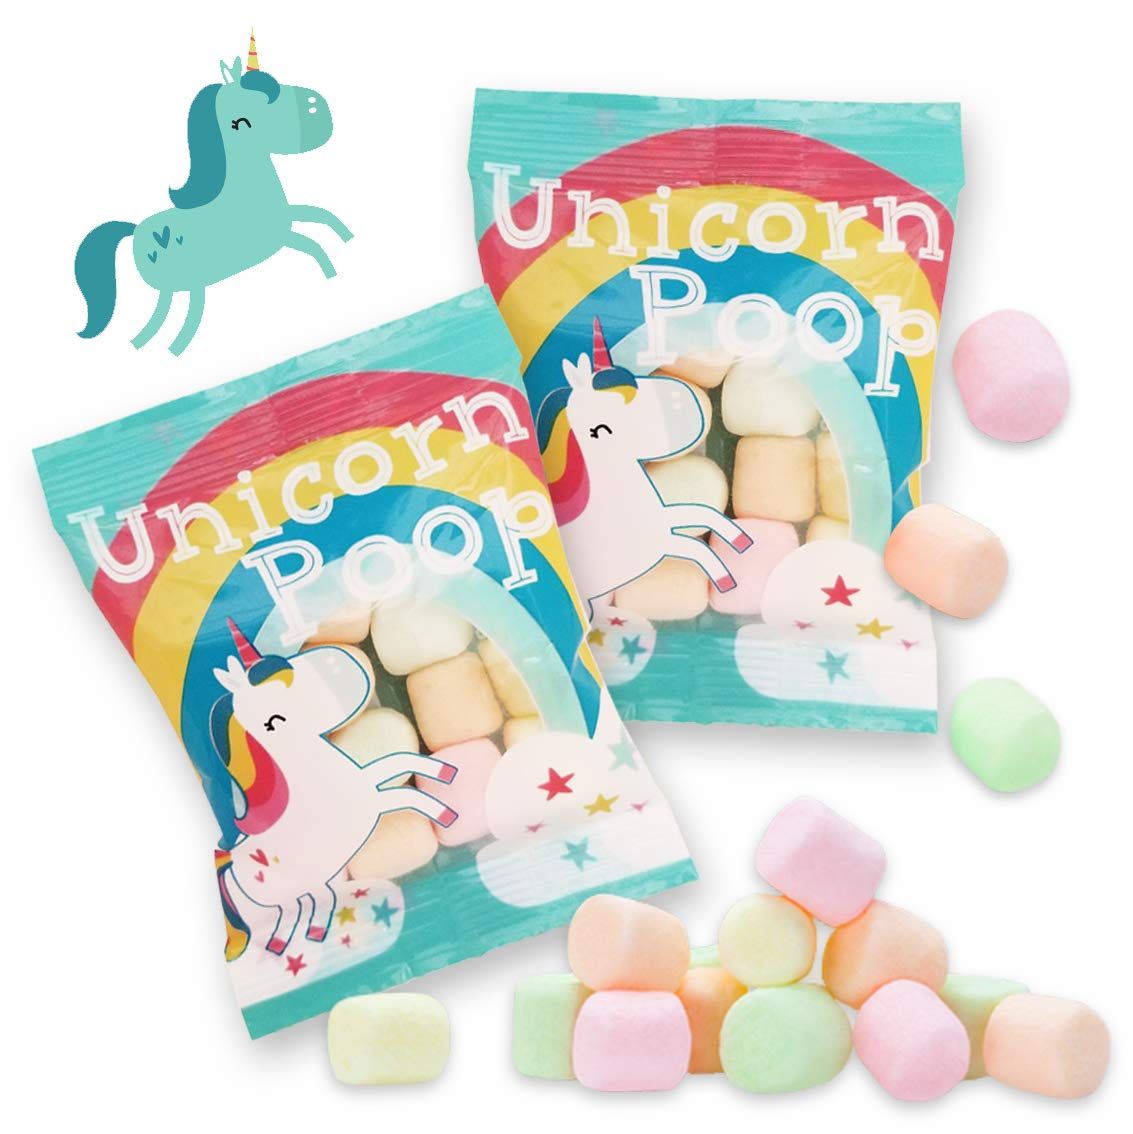 Unicorn Poop Candy - Made in the USA - 12 Unicorn Party Supplies - Unicorn Birthday Party Favors for | Amazon (US)